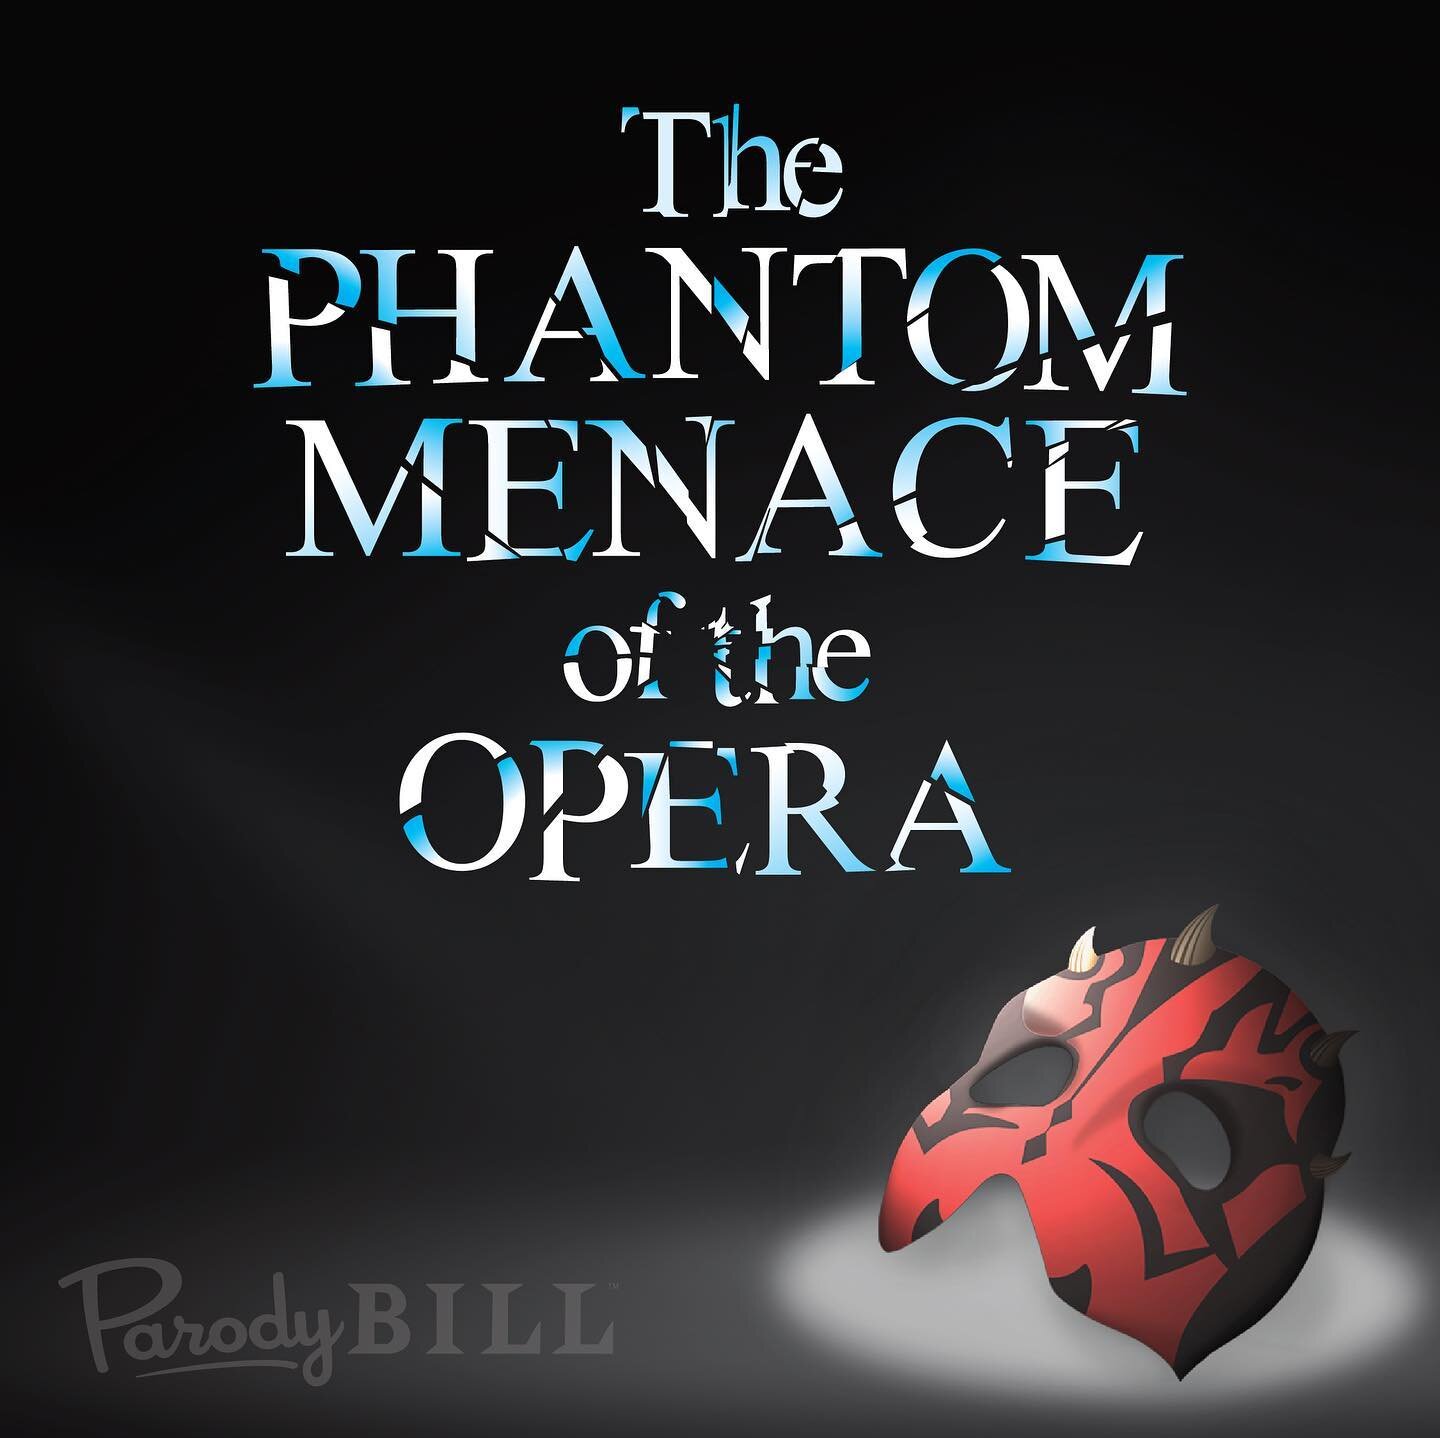 In this darkness which you know you cannot fight, MAY THE FOURTH be the music of the night. 4️⃣🚀🎶🌙
&nbsp; &nbsp; &nbsp; &nbsp; &nbsp; 
Happy Star Wars Day!
&nbsp; &nbsp; &nbsp; &nbsp; &nbsp; 
#Maythe4th #PhantomoftheOpera #Maythe4thBeWithYou #May4